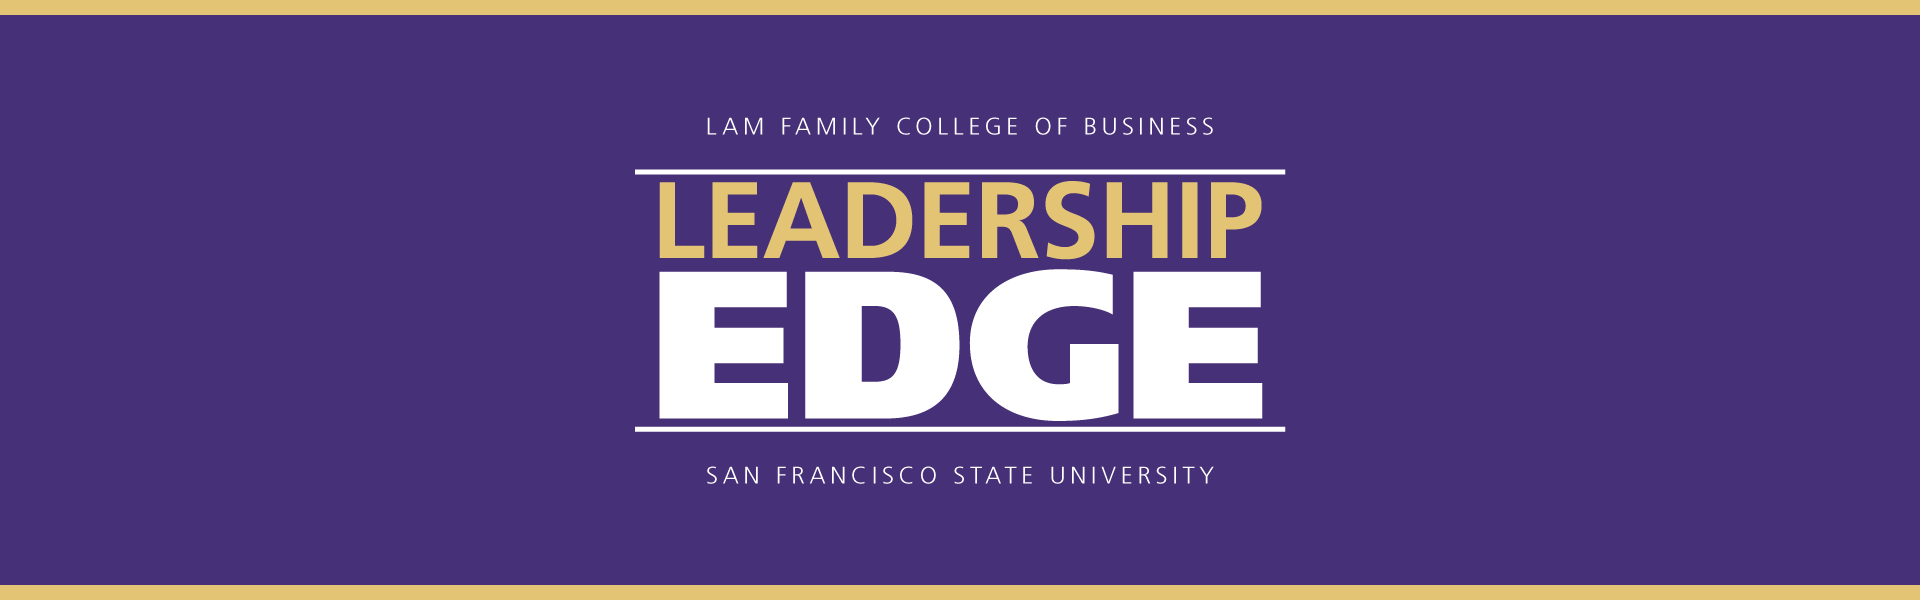 Lam Family College of Business Leadership EDGE San Francisco State University